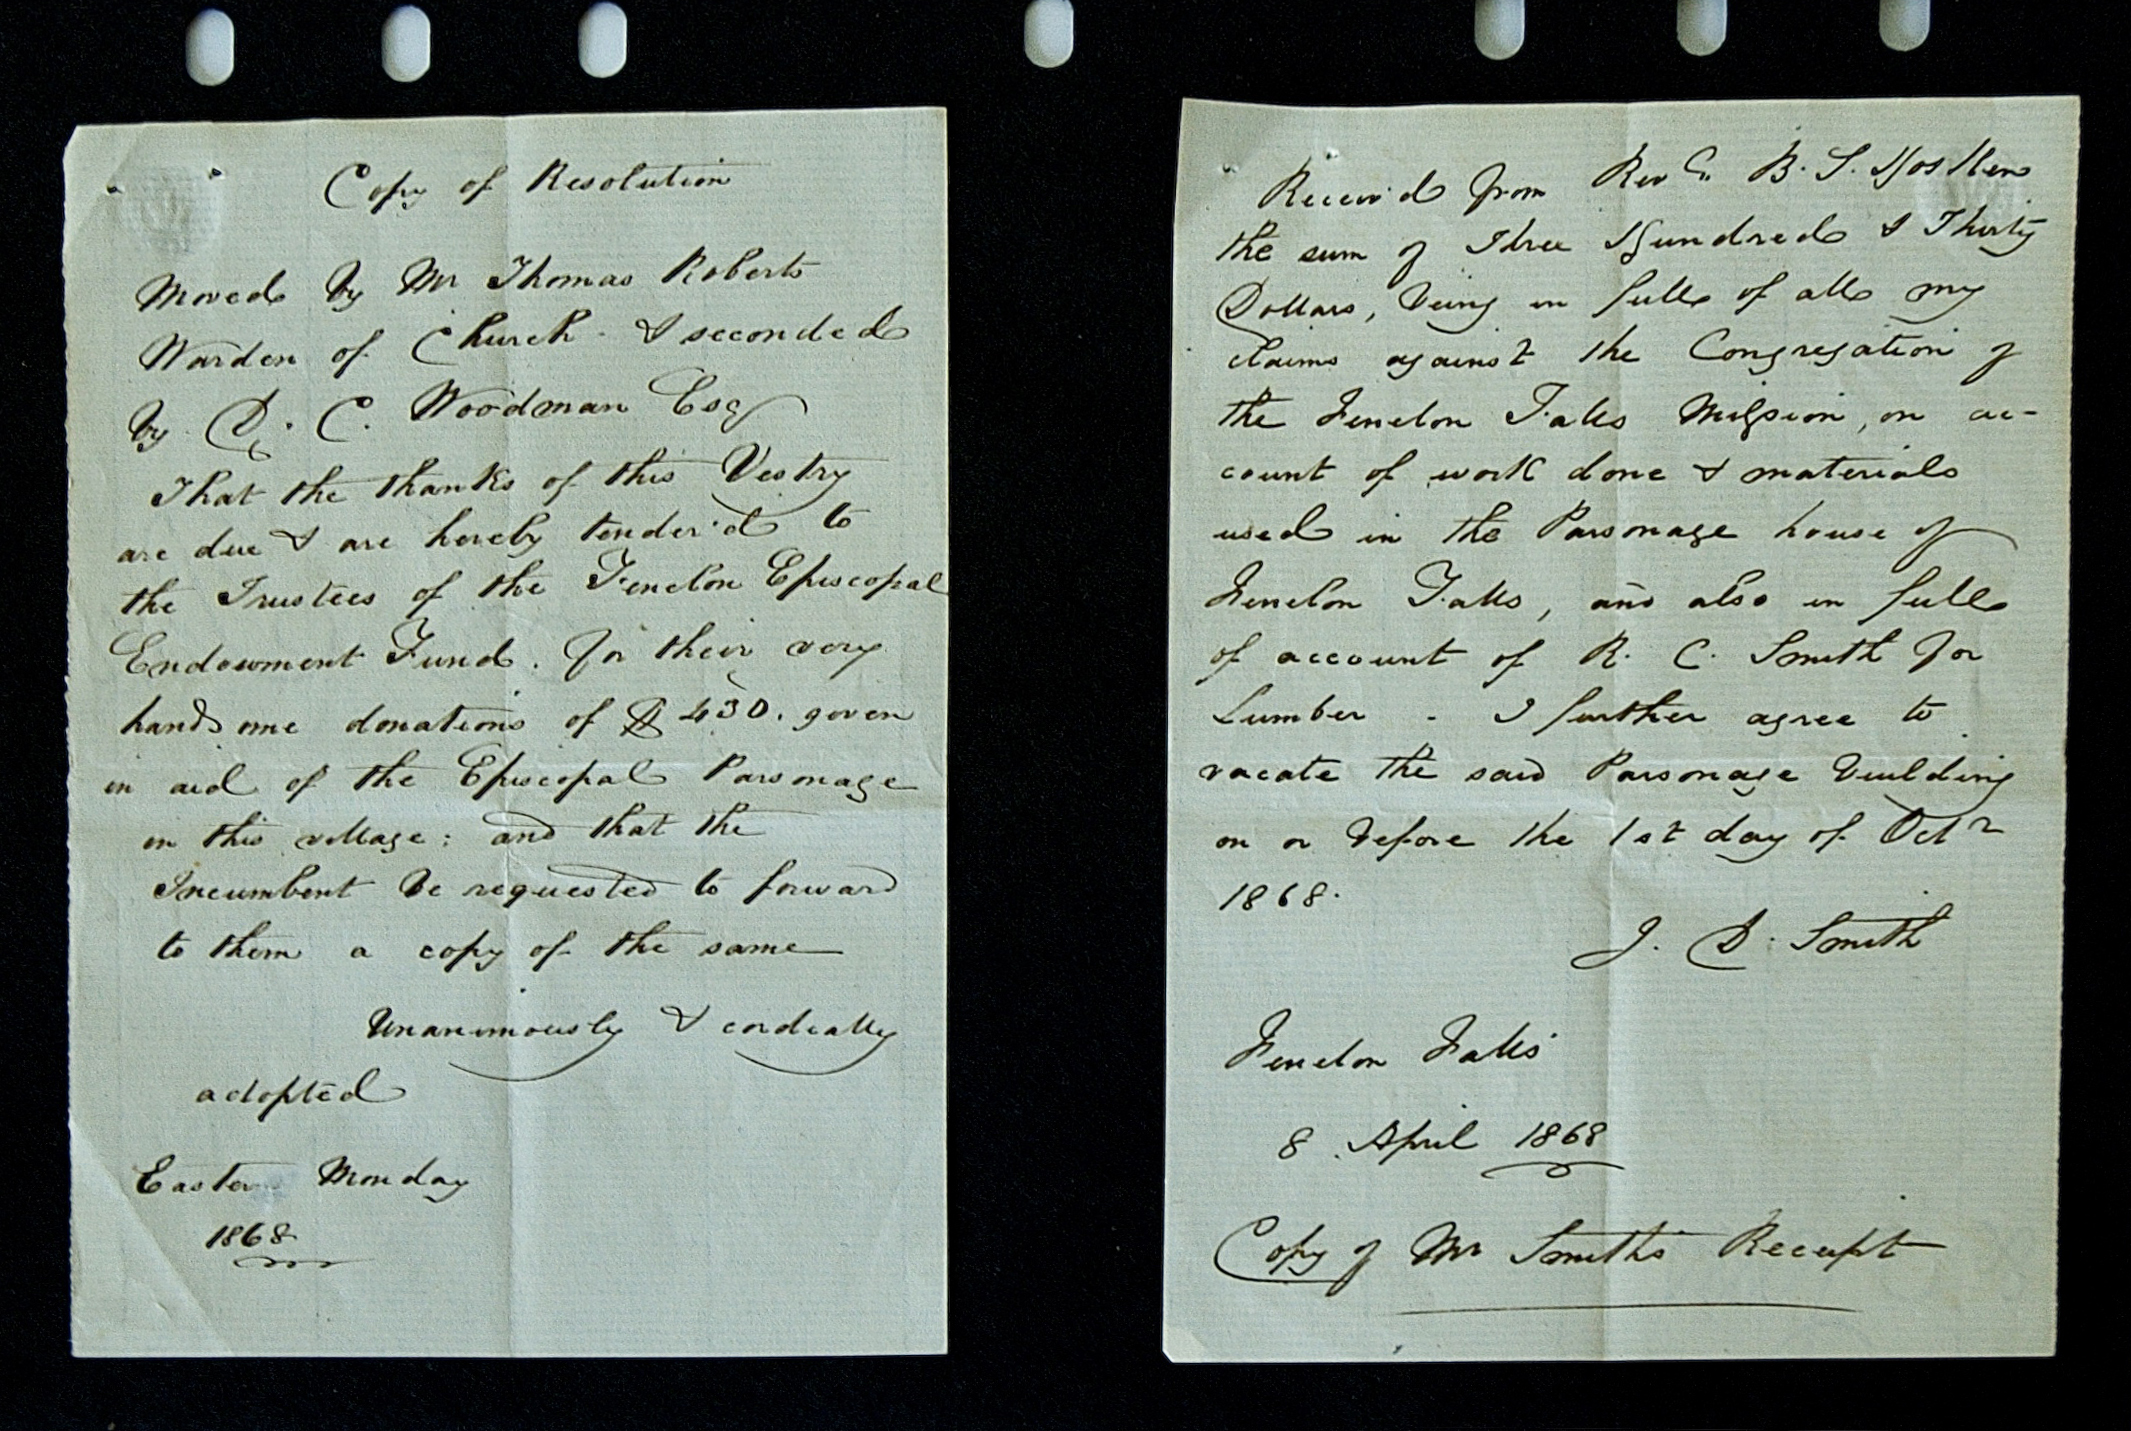 Two pages of a hand written text from April 8, 1868 regarding church resolution.